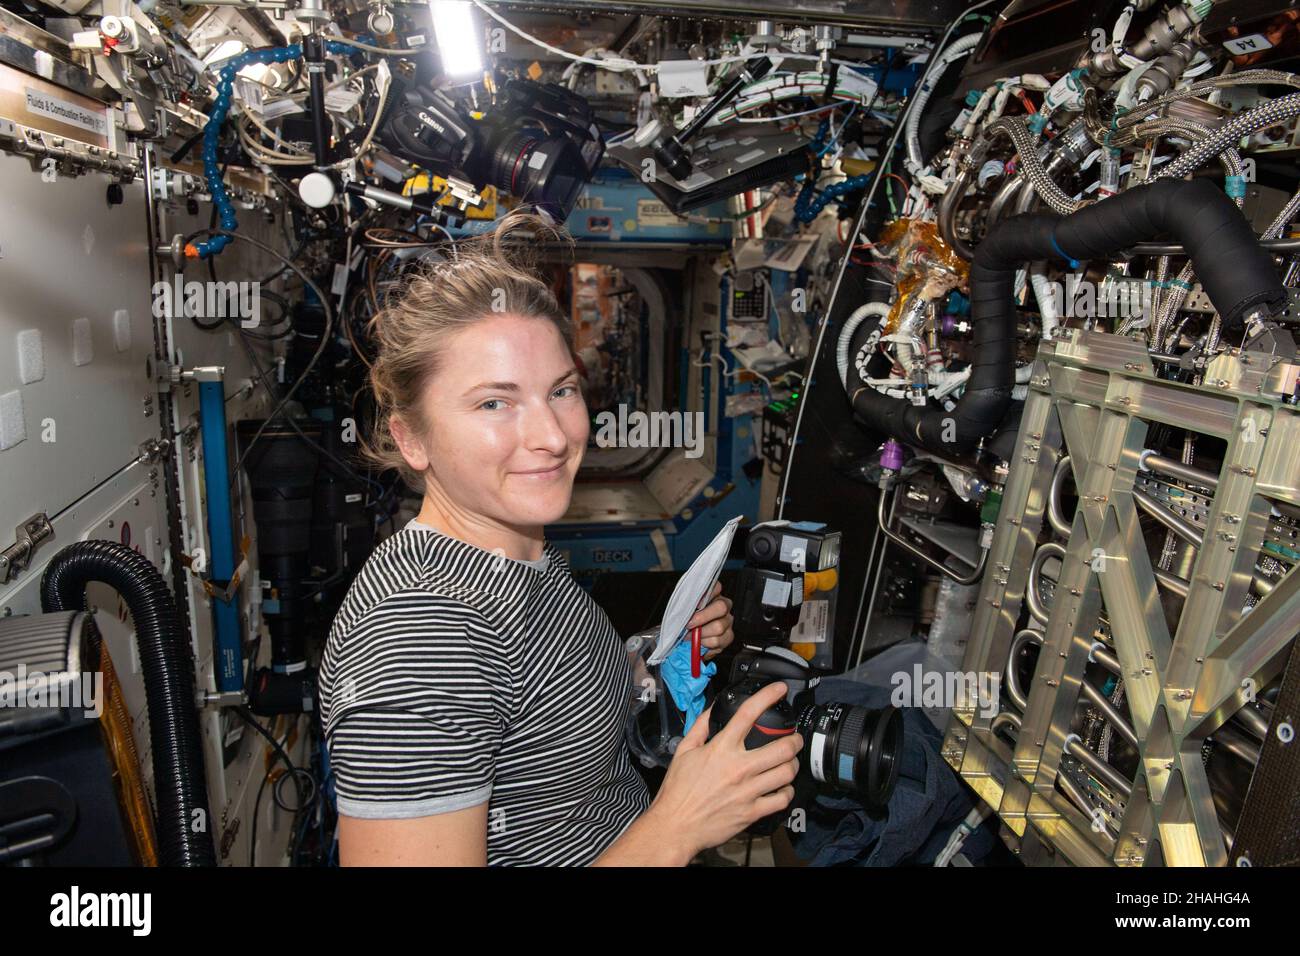 ISS - 04 December 2021 - NASA astronaut and Expedition 66 Flight Engineer Kayla Barron is pictured inspecting and photographing components inside the Stock Photo